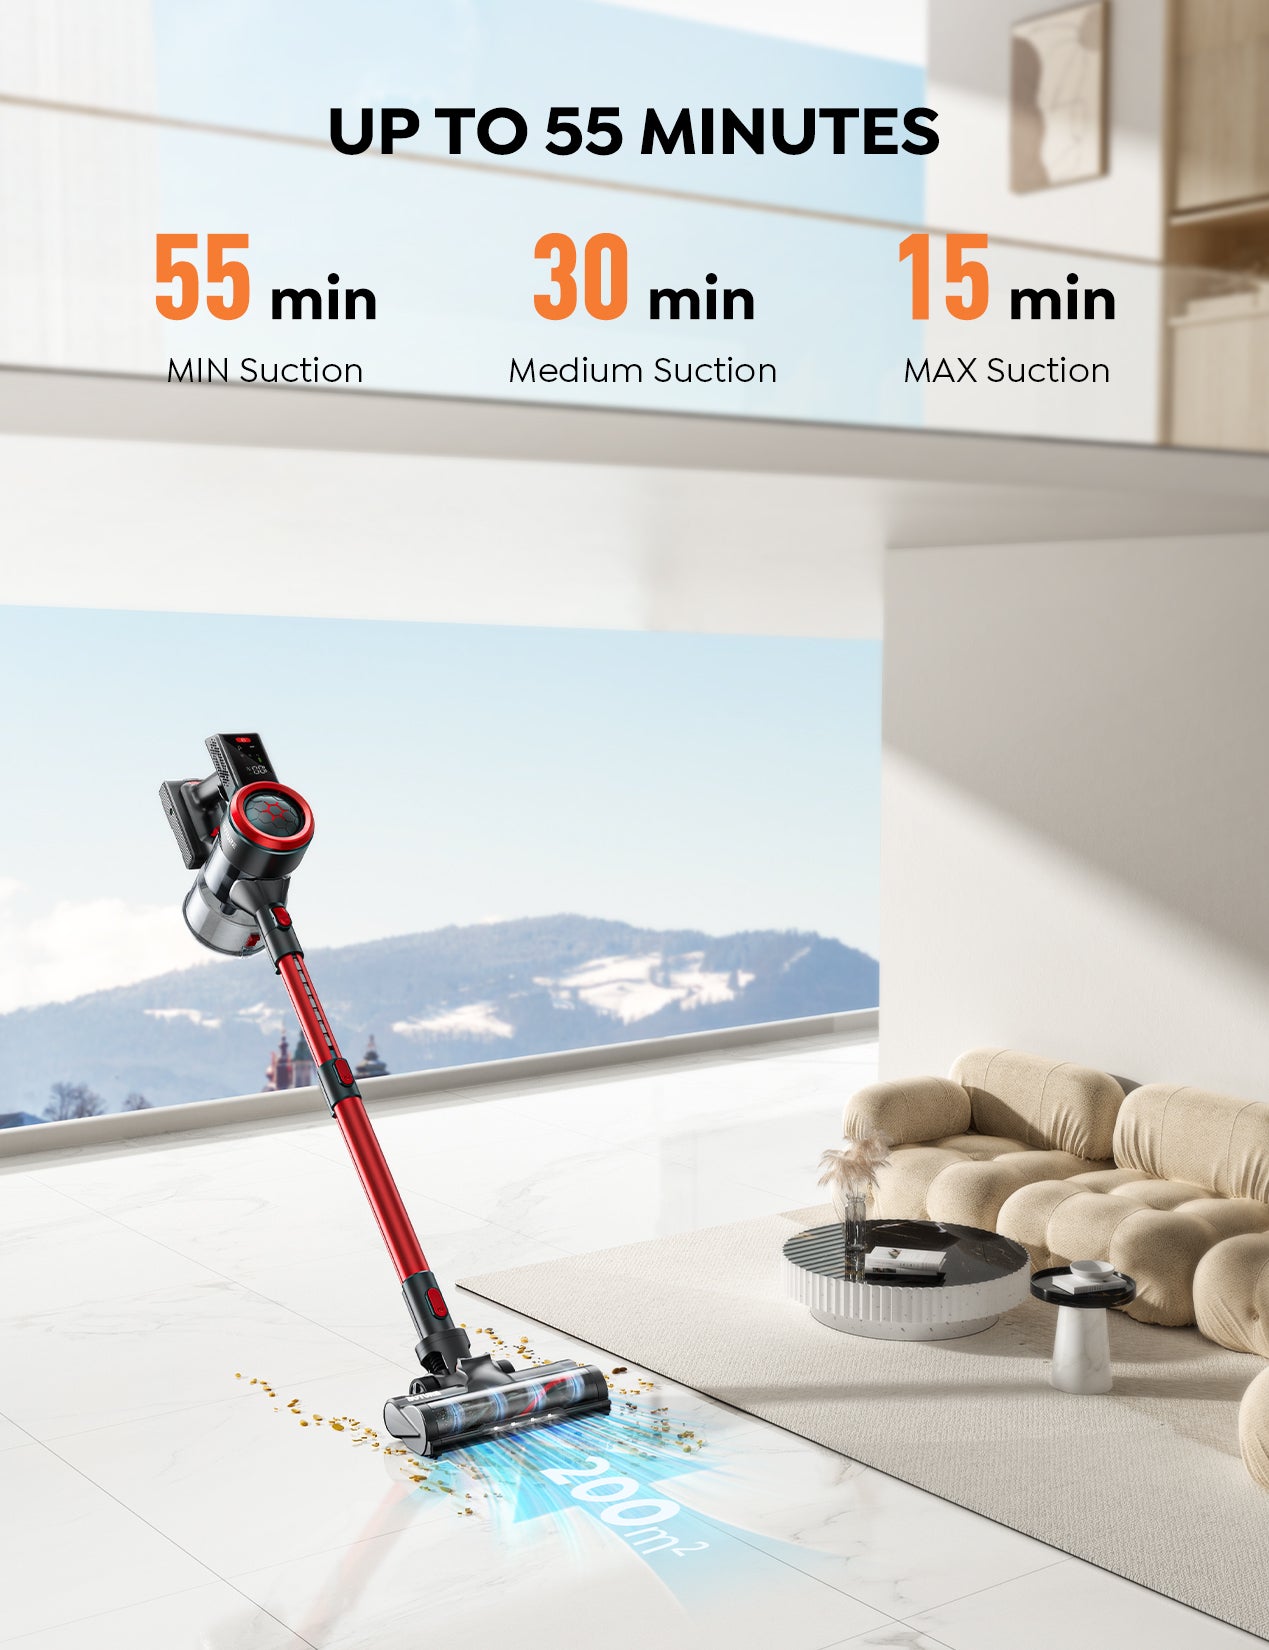 55 Minutes Runtime of BuTure JR700 Vacuum Cleaner